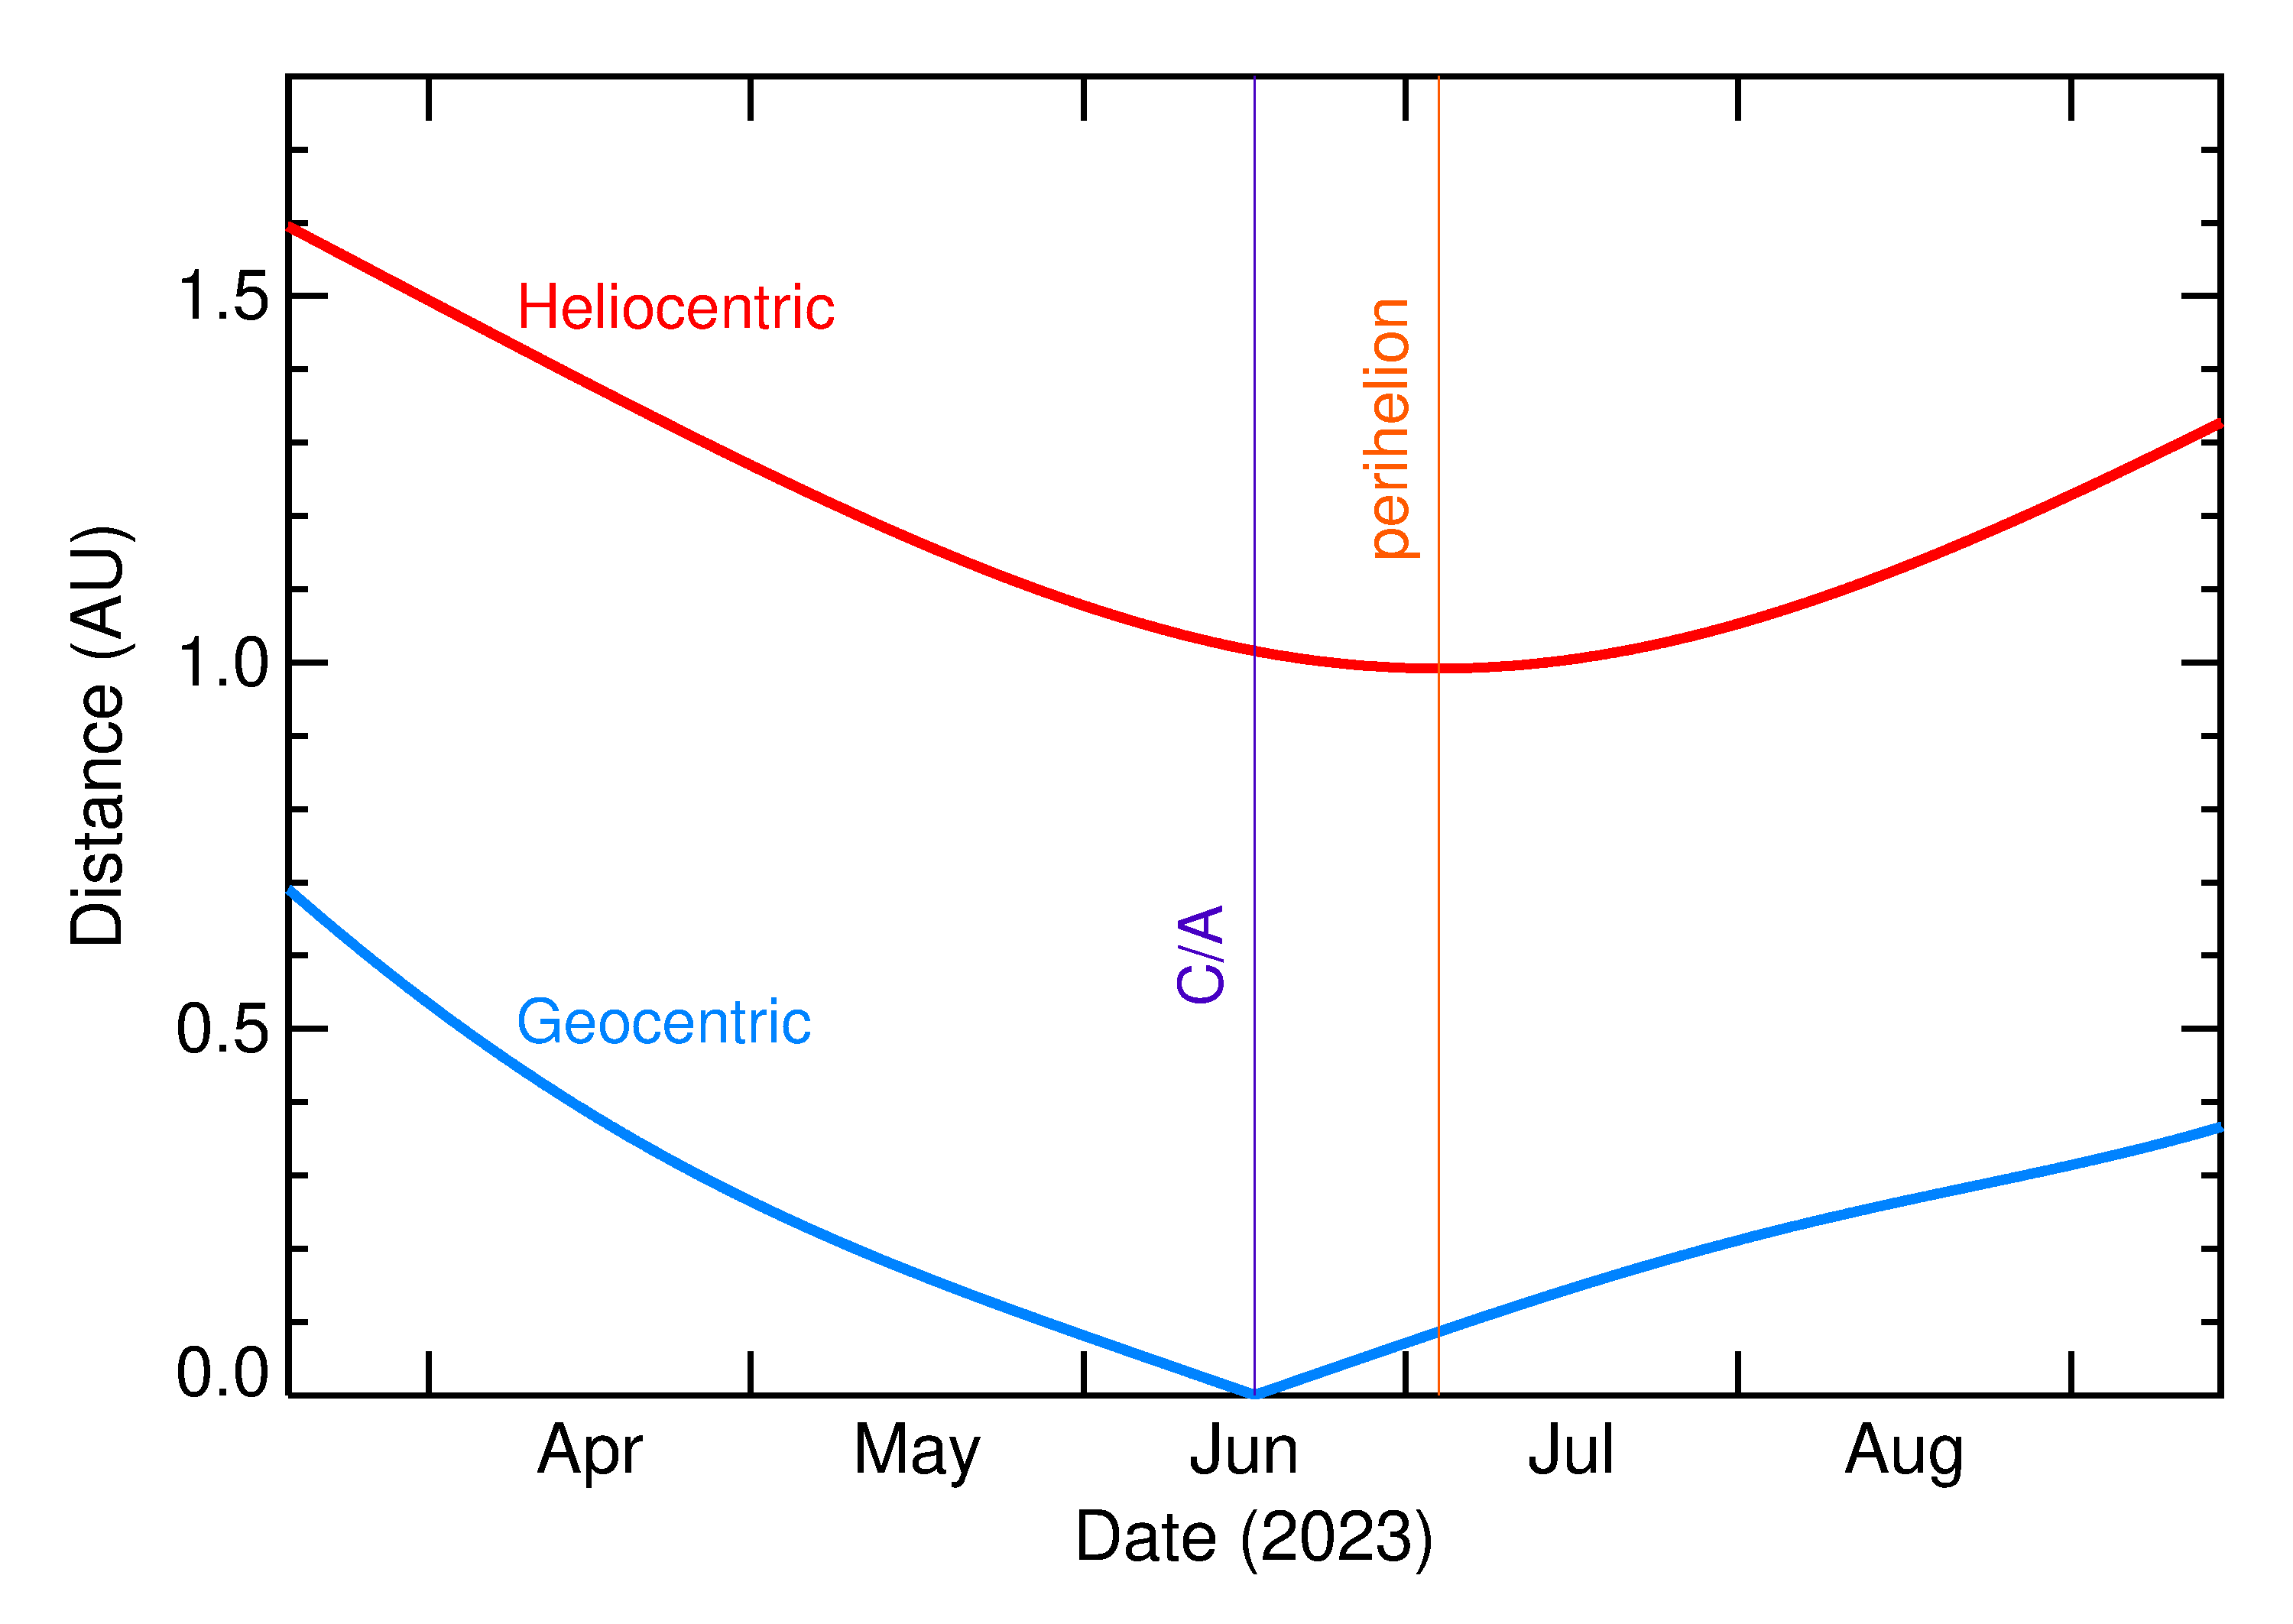 Heliocentric and Geocentric Distances of 2023 LM1 in the months around closest approach